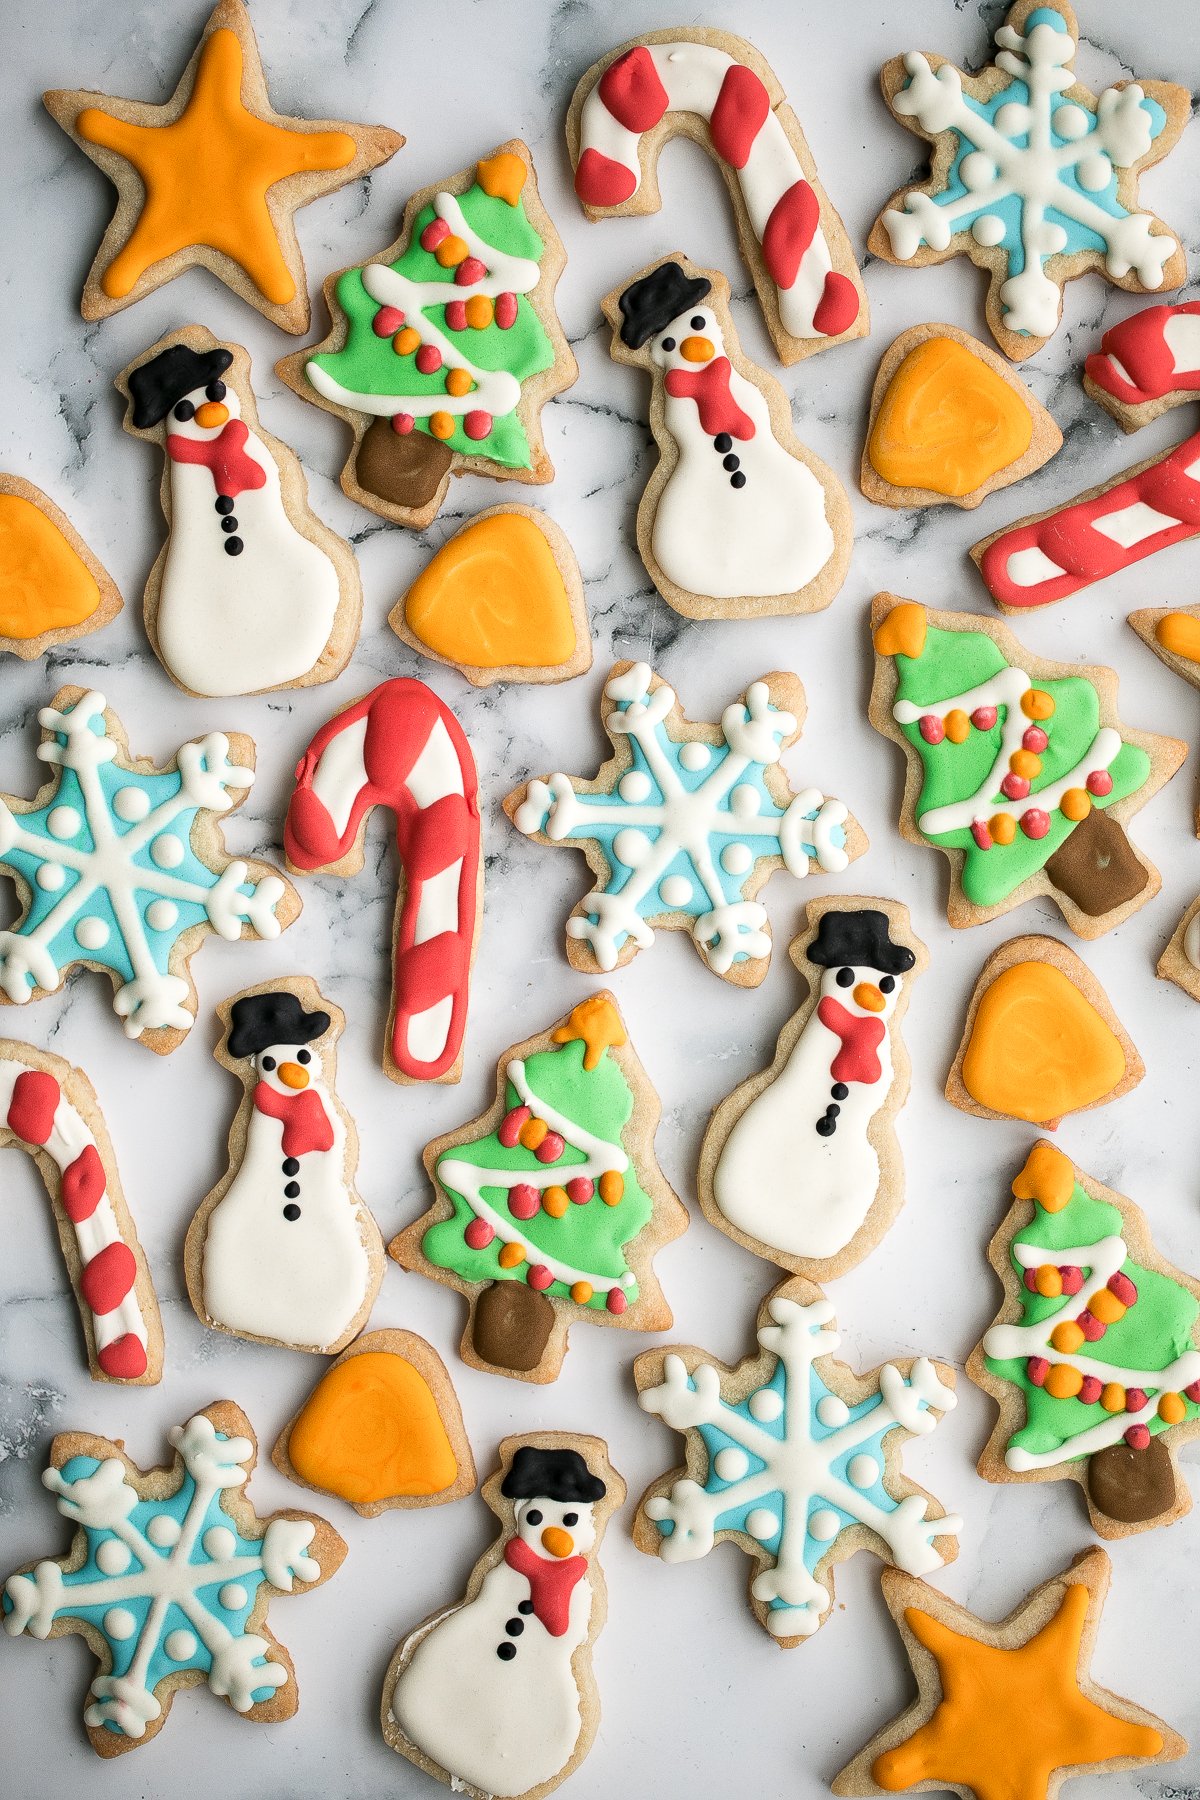 https://www.aheadofthyme.com/wp-content/uploads/2015/12/christmas-sugar-cookies-with-royal-icing-8.jpg